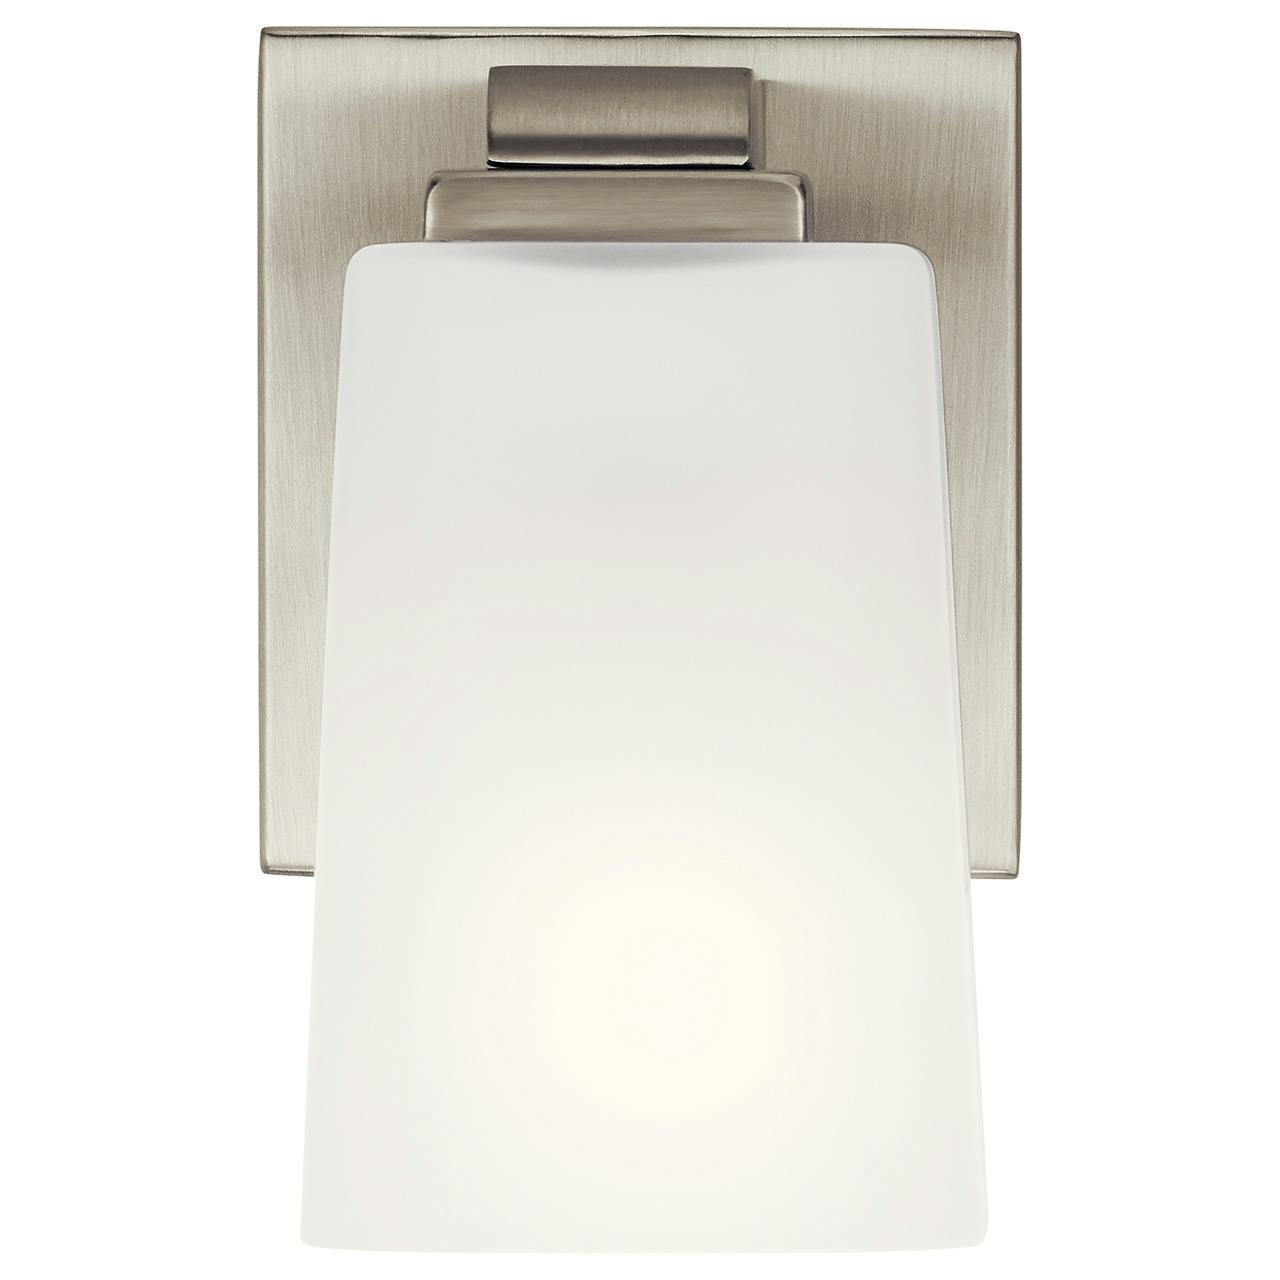 The Roehm™ 1 Light Wall Sconce Brushed Nickel facing down on a white background